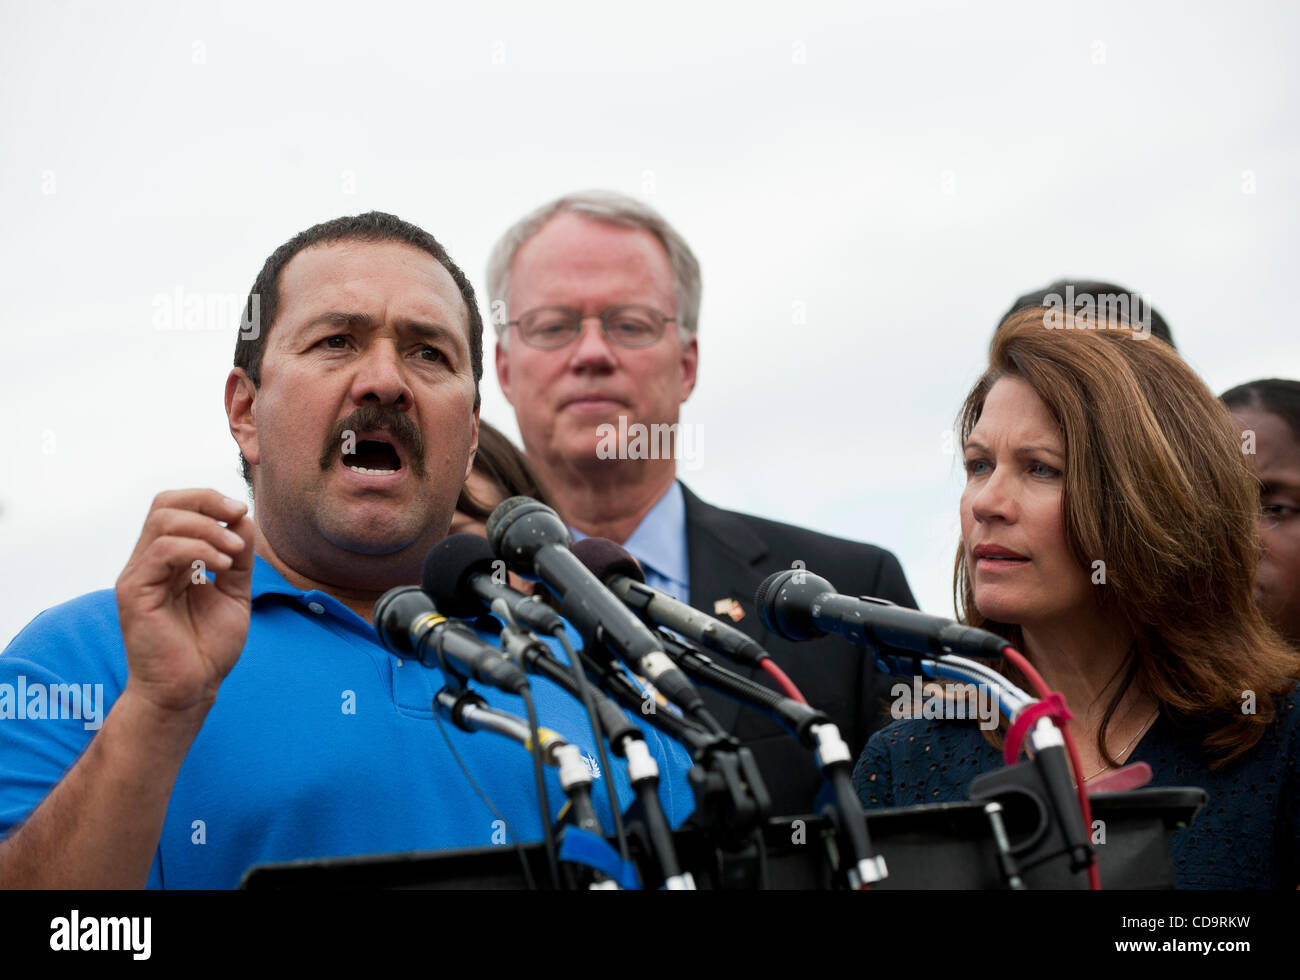 Jul 21, 2010 - Washington, District of Columbia, U.S., - Rep. MICHELE BACHMANN (R-MN) looks on as TITO MUNOZ, a contruction worker from Woodbridge, Virginia, speaks to the media after the first meeting of the newly formed Tea Party Caucus outside of the Capitol on Wednesday. MICHELLE BACKMANN (right Stock Photo